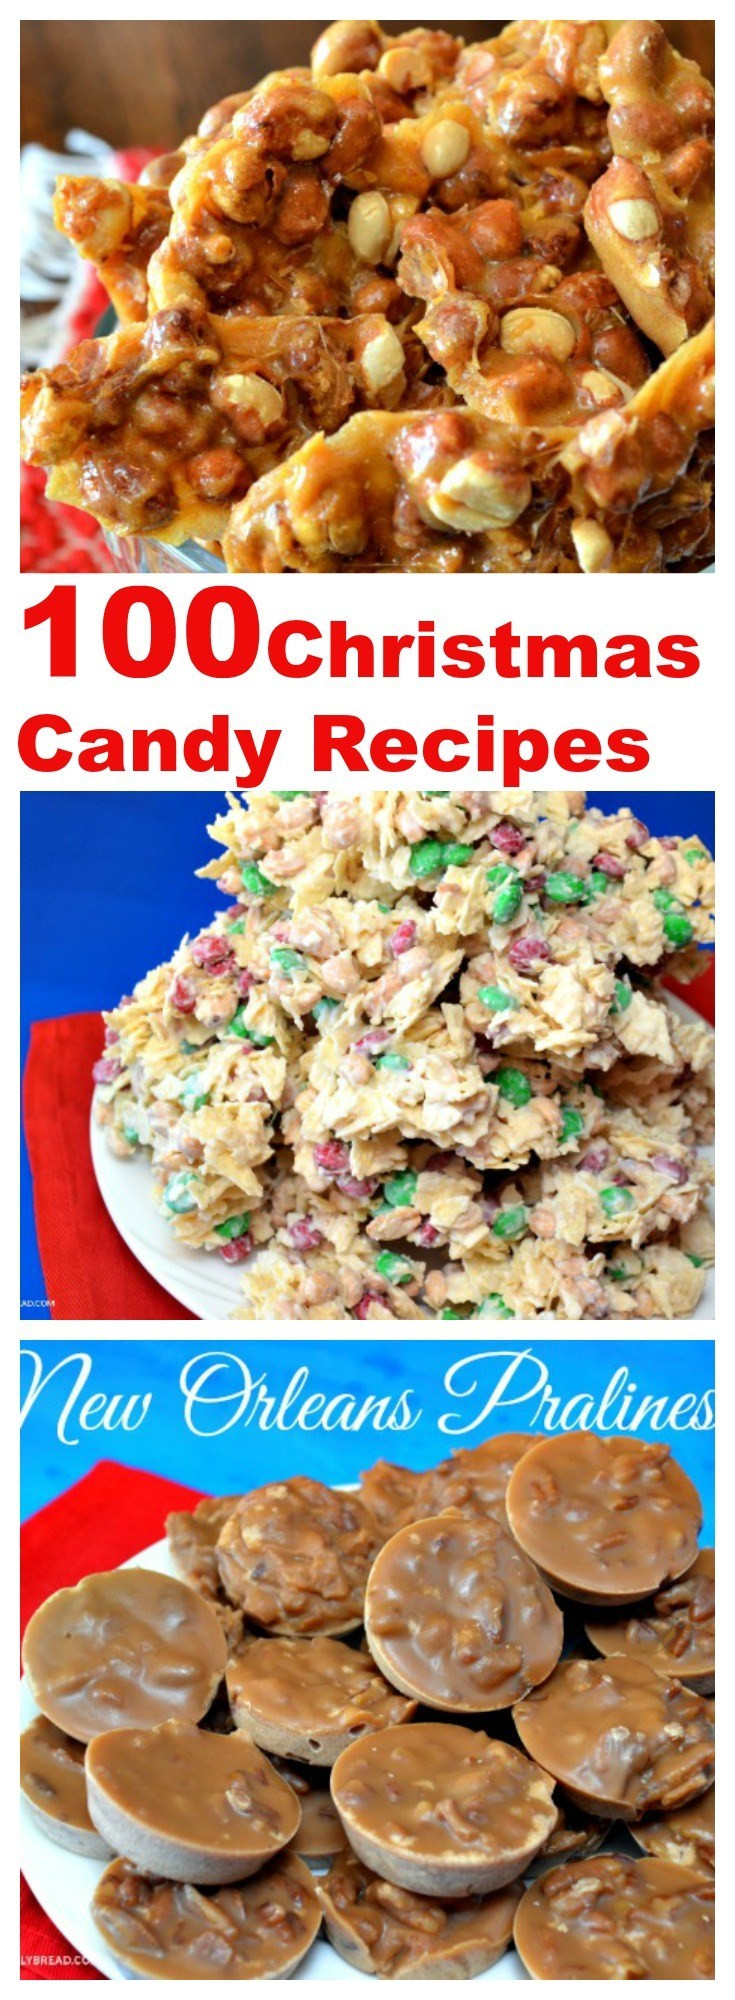 Popular Christmas Candy
 BEST CHRISTMAS CANDY RECIPES ROUNDUP